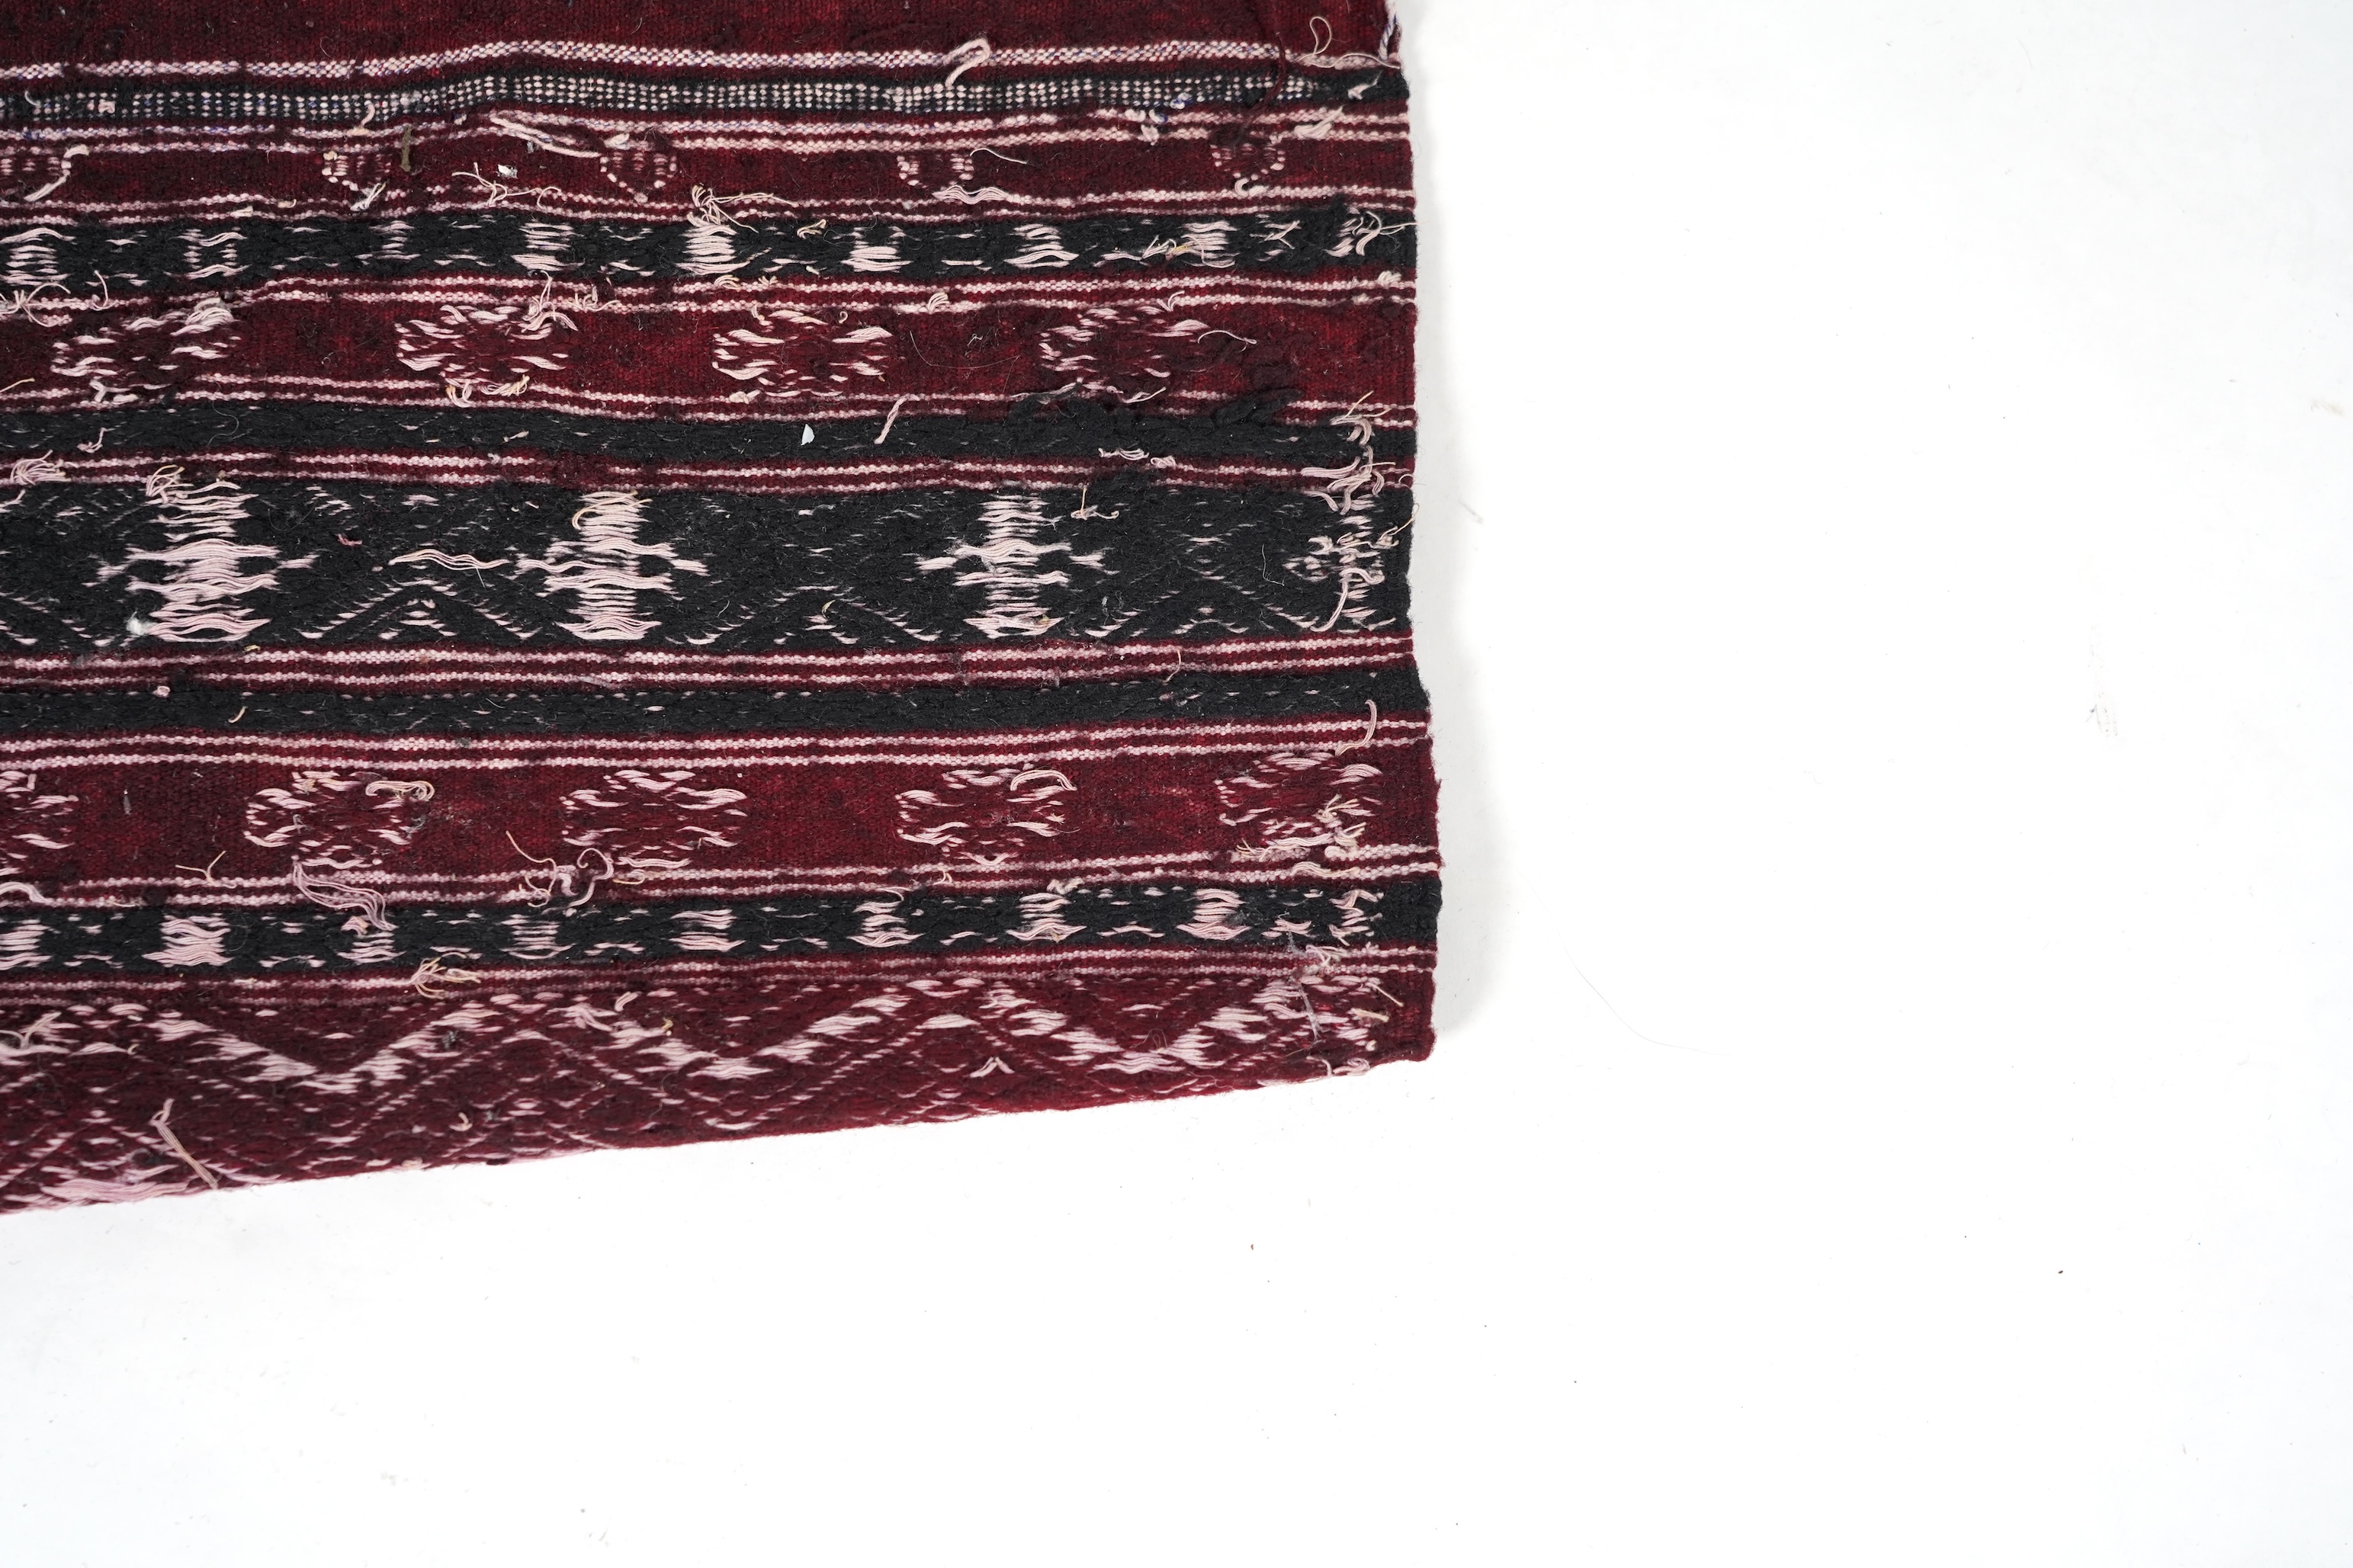 A Tunisian Amazigh, Berber maroon and white woven wool wall hanging, possibly 107 x 125cm